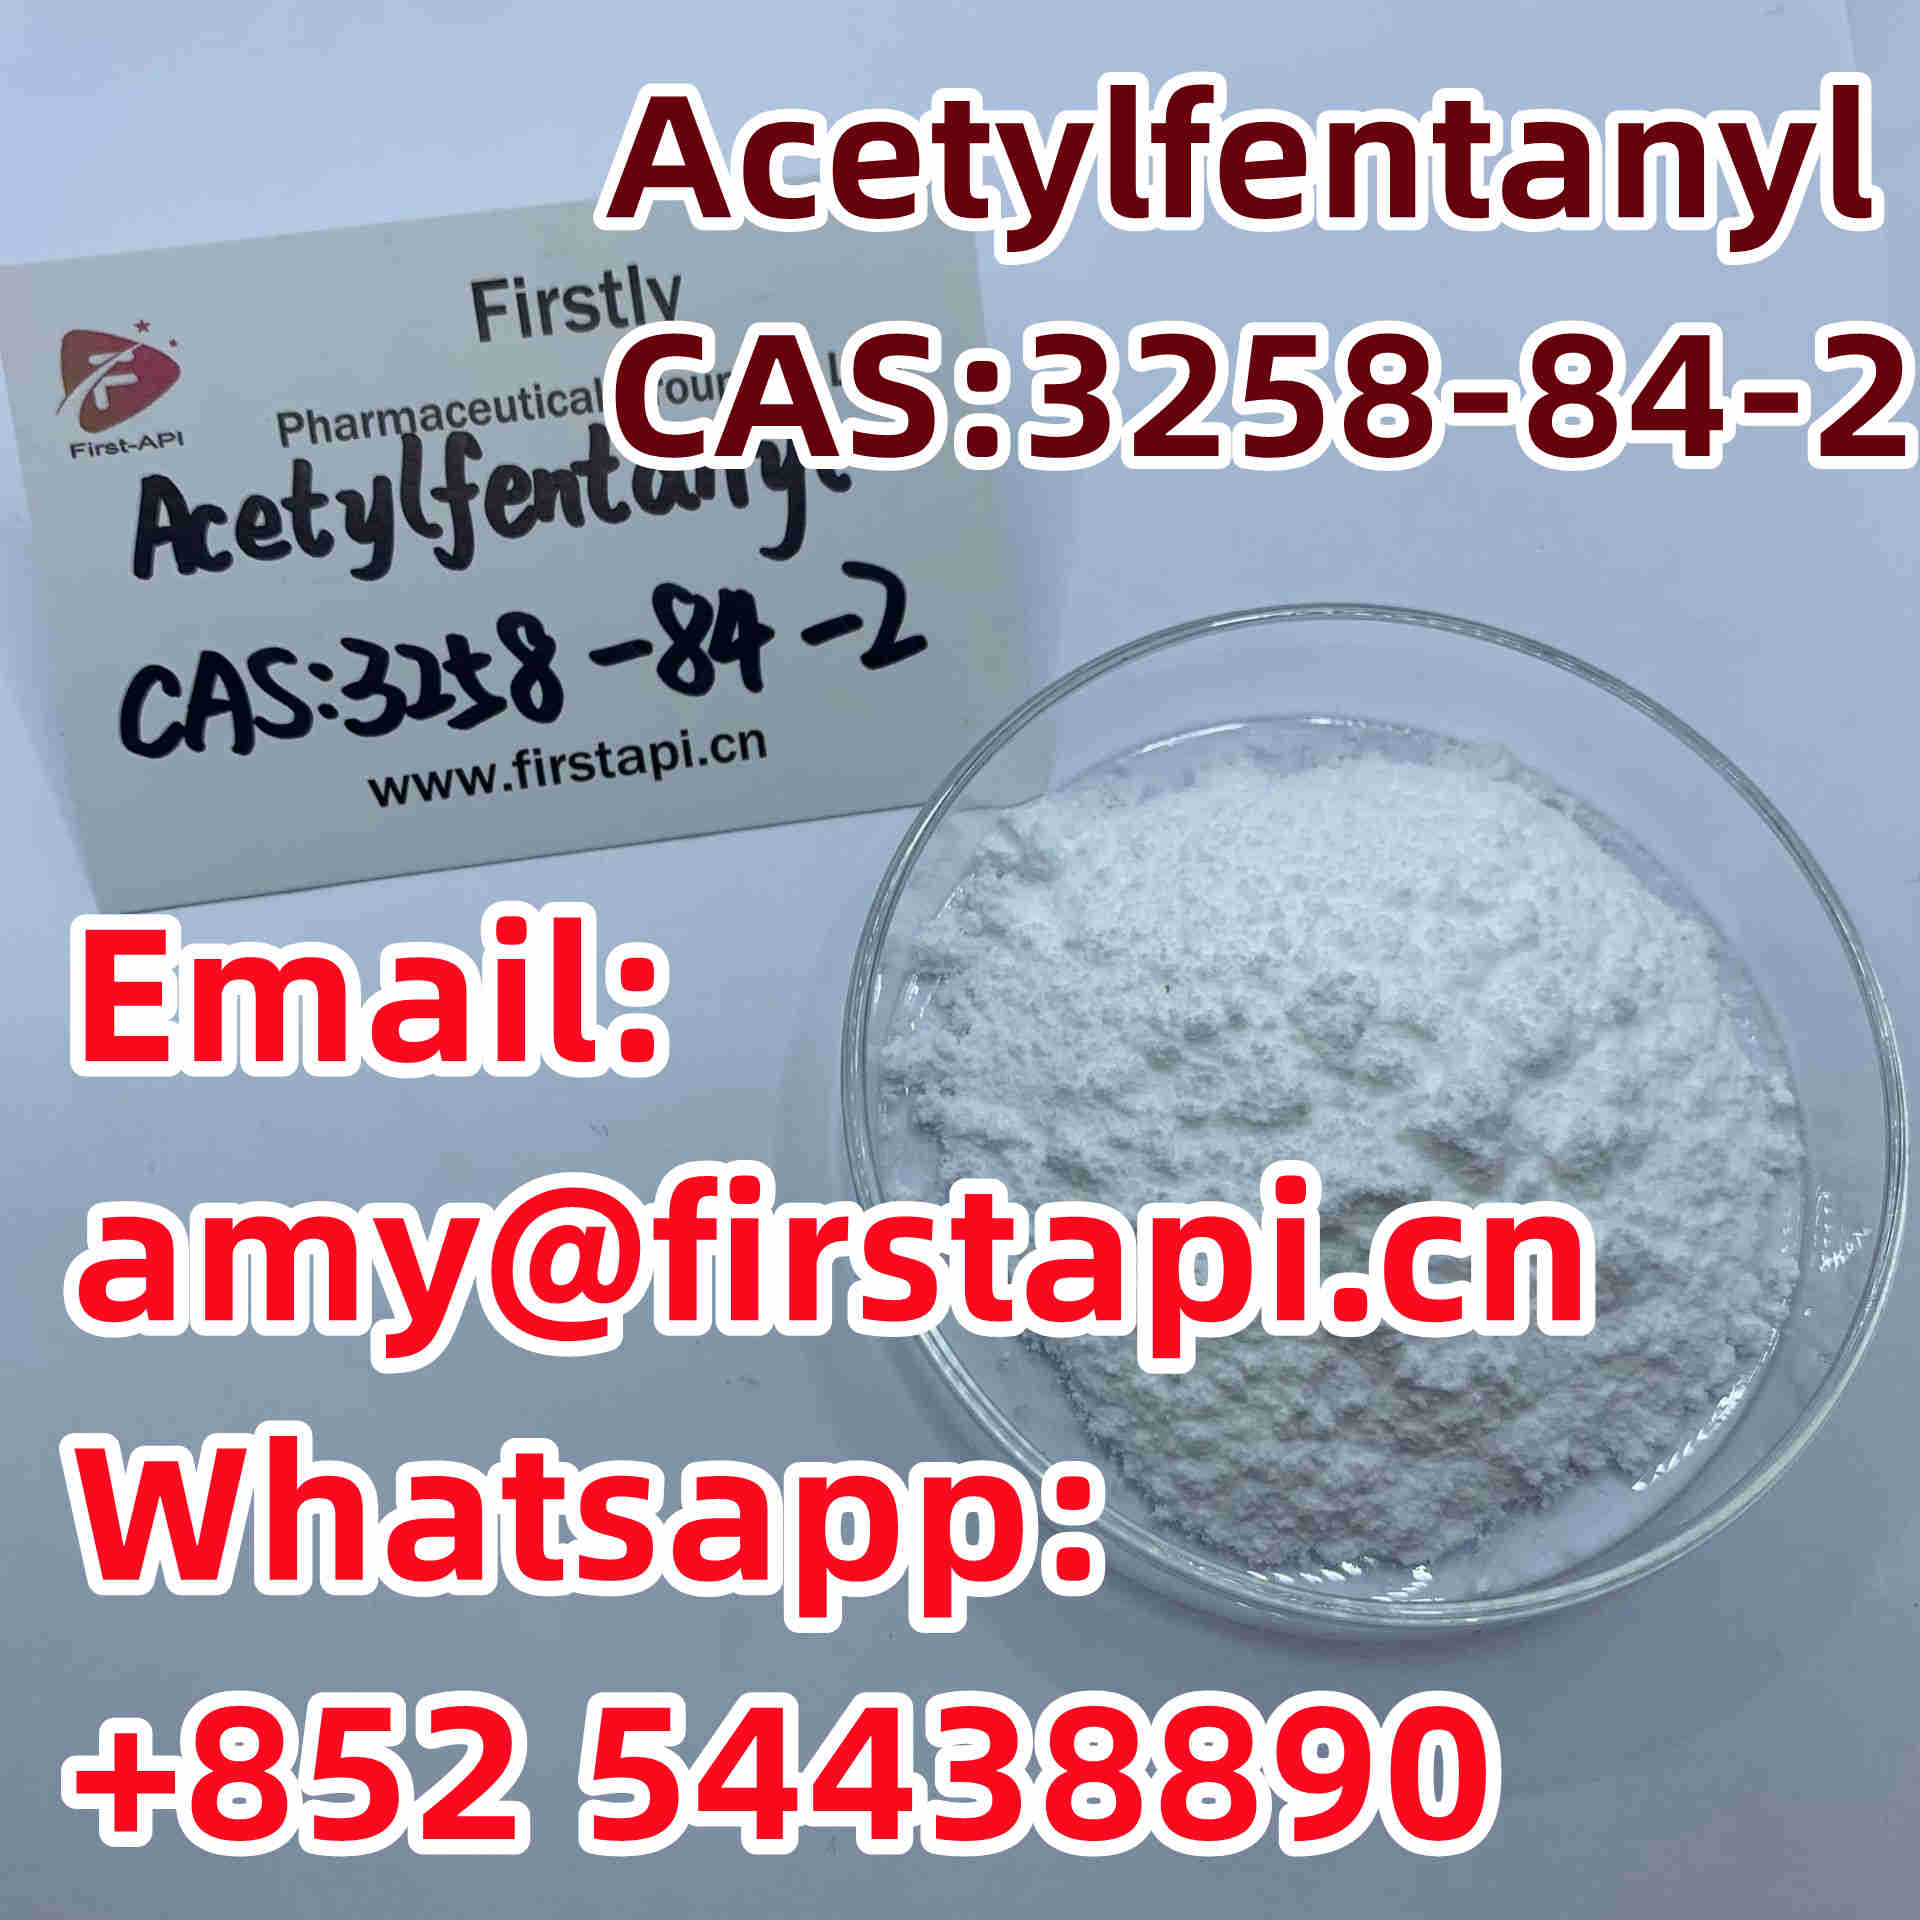 CAS No.:	3258-84-2,Whatsapp:+852 54438890,Acetylfentanyl,made in china - photo